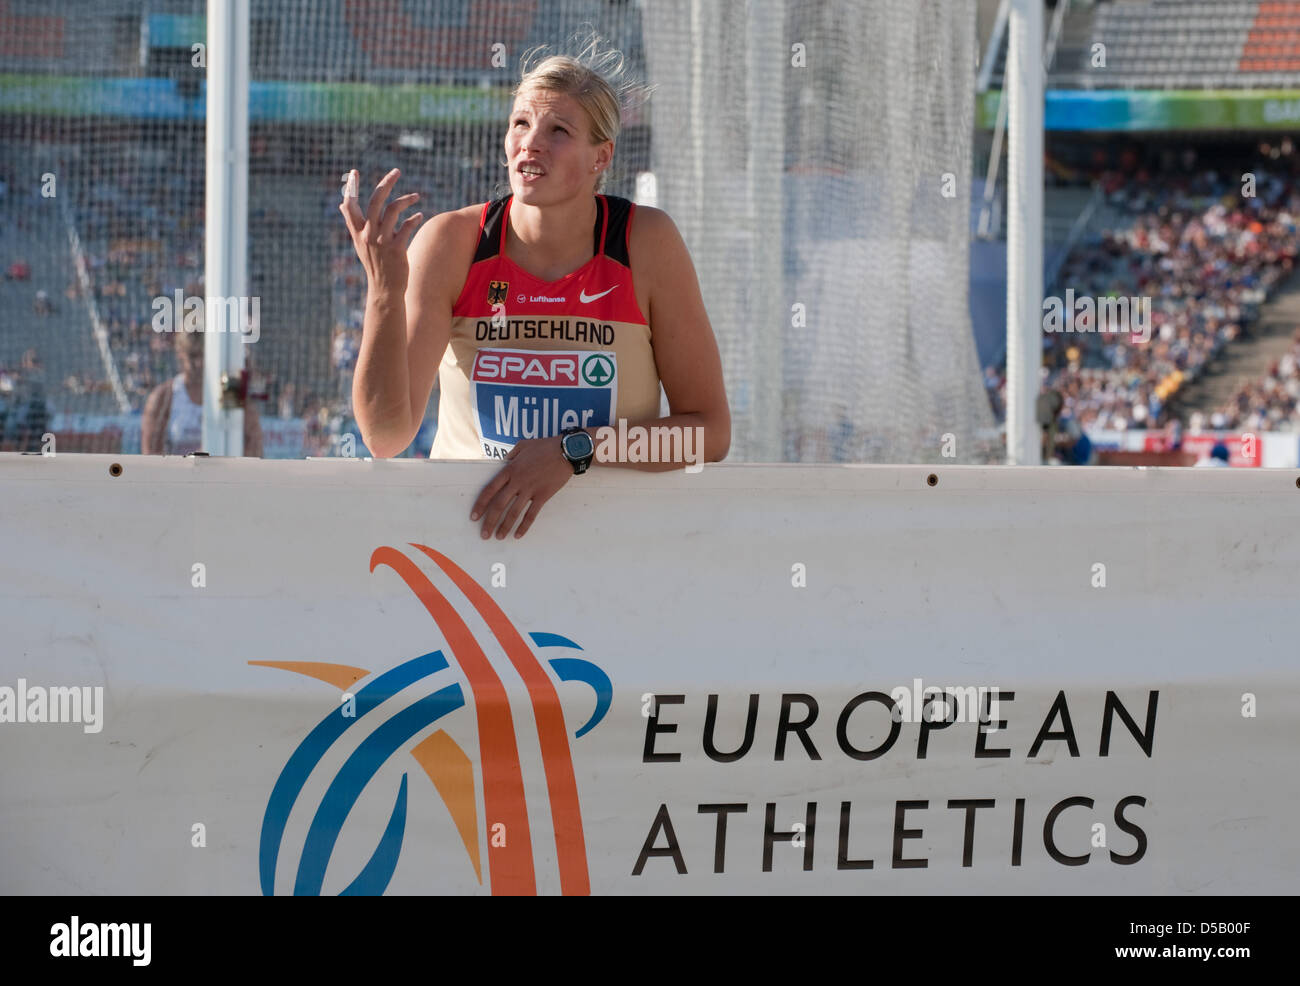 The picture features German Nadine Mueller during the women's discus final at the European Athletics Championships in Barcelona, Spain, 28 July 2010. Mueller finished eighth. Photo: Bernd Thissen Stock Photo